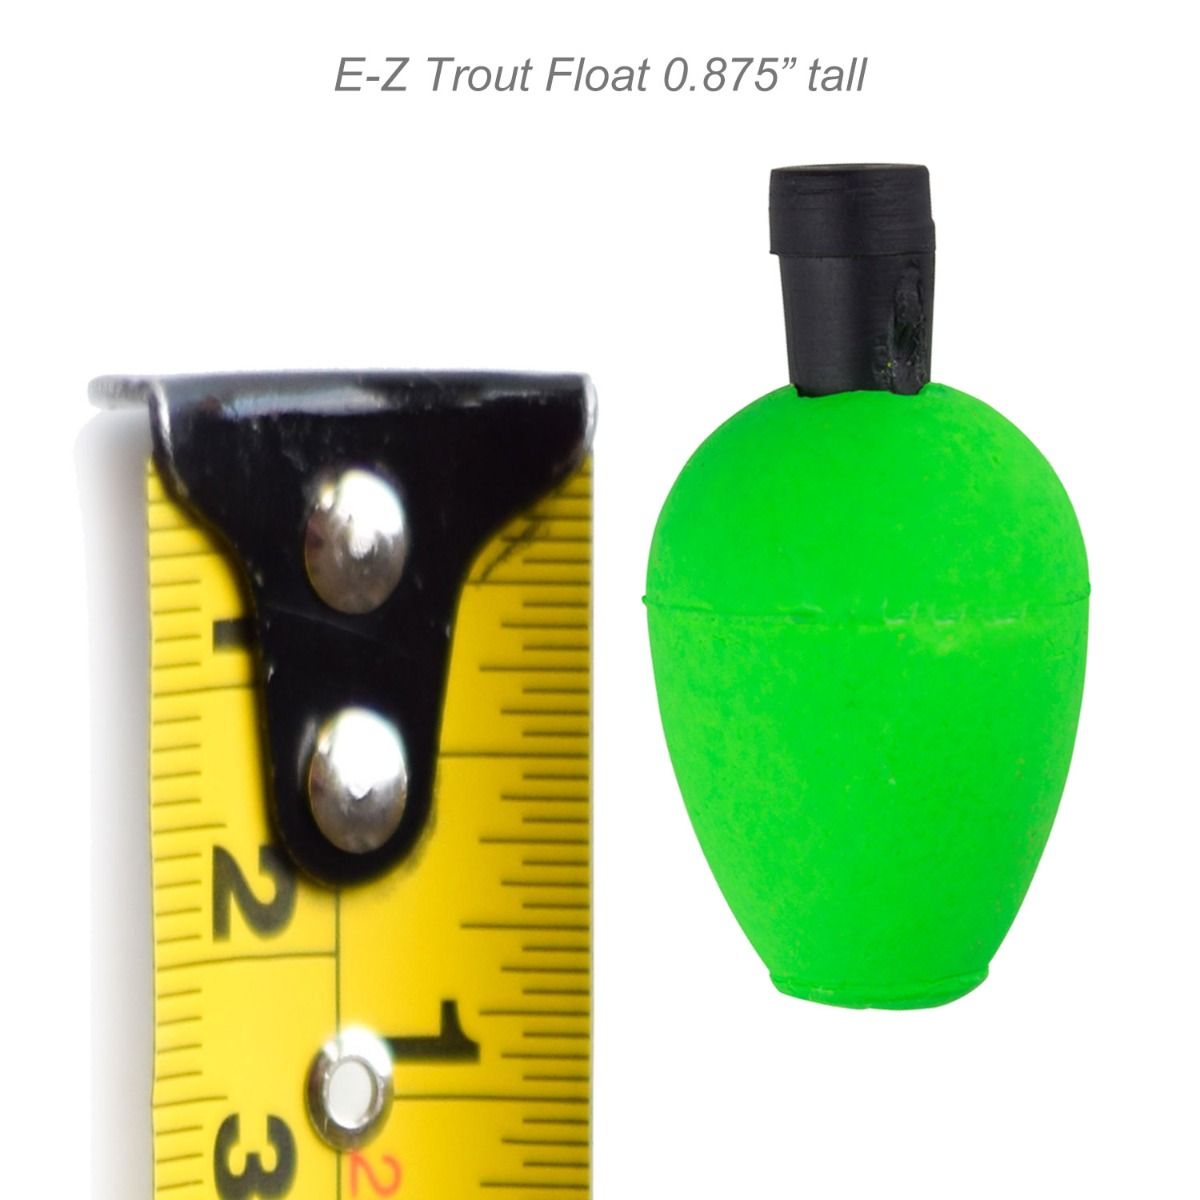 Leland 36 Slotted Bobber E-Z Trout Floats Green, Red, Yellow (87666)